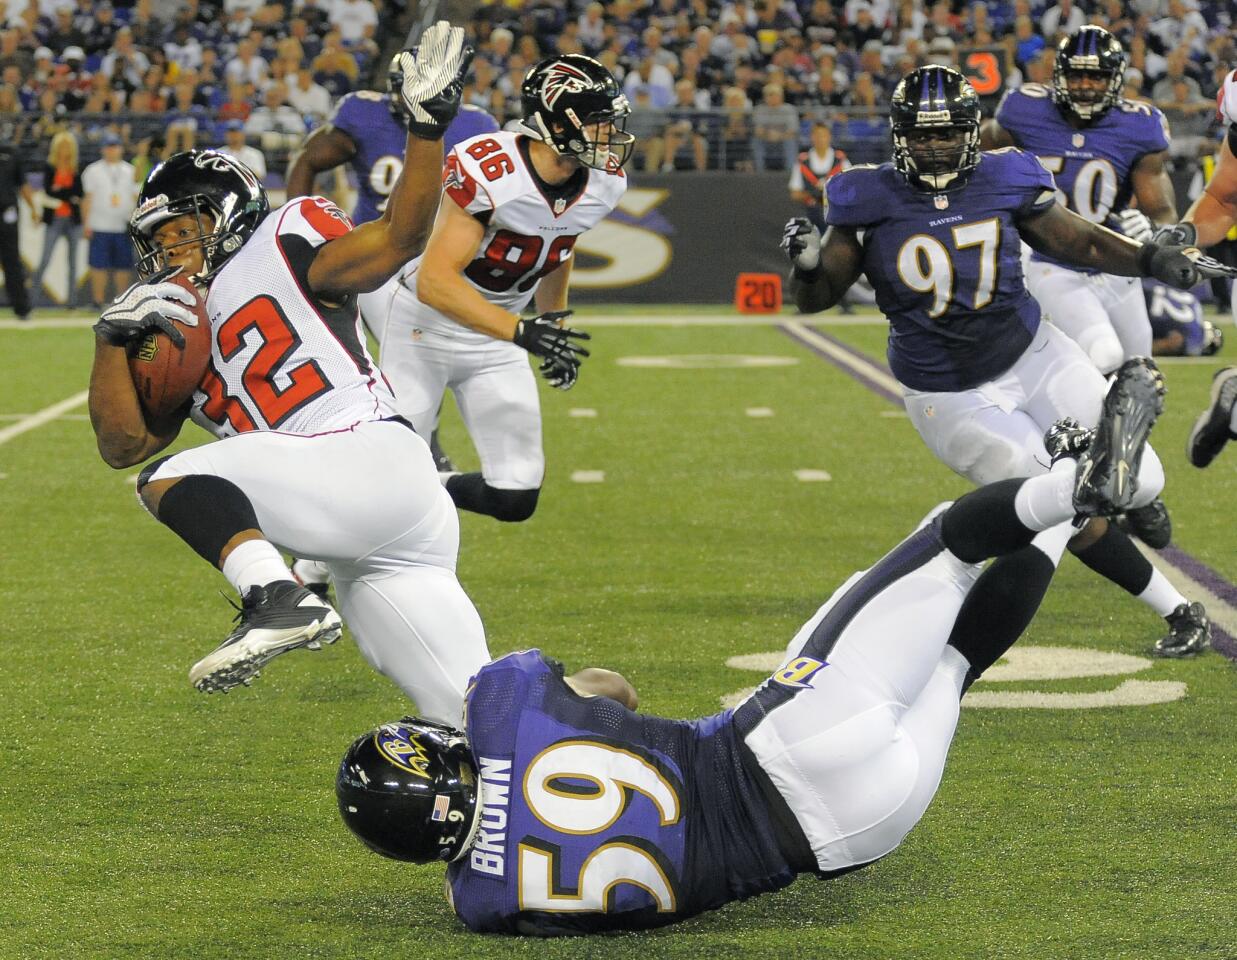 The Ravens got good news this week with inside linebacker Jameel McClain being medically cleared from a bruised spine. That could help the run defense down the road. There's another development in play, though. Rookie weak-side linebacker Arthur Brown was up to 23 snaps defensively against the Dolphins and had a nice open-field tackle after he quickly diagnosed a screen play. The second-round draft pick is getting healthier since straining his left pectoral against the Cleveland Browns in Week 2, and is starting to cut into starter Josh Bynes' playing time. The biggest thing Brown has to overcome is a lack of ideal size. He fluctuates between 227 and 230 pounds, and his injury has limited his ability to lift weights. "He seems to be playing pretty well," defensive coordinator Dean Pees said. "He's coming along as a rookie. I think we've been trying to kind of slow things down at the beginning of the year, and then we had to slow things down when he got hurt. I think he's really starting to pick things up [and] starting to understand. "The other thing that's really helping Arthur Brown, too, is the fact that Daryl Smith ... the more he understands, the more he can help the linebacker beside him. There are some times he's very helpful in telling [Brown] what to do, and they're on the same page. Really, we have two guys in there who don't really have a lot of experience in our defense. You've got an experienced player and a rookie, but not a lot of experience in our defense. And I think the more those guys play together, the better it is."